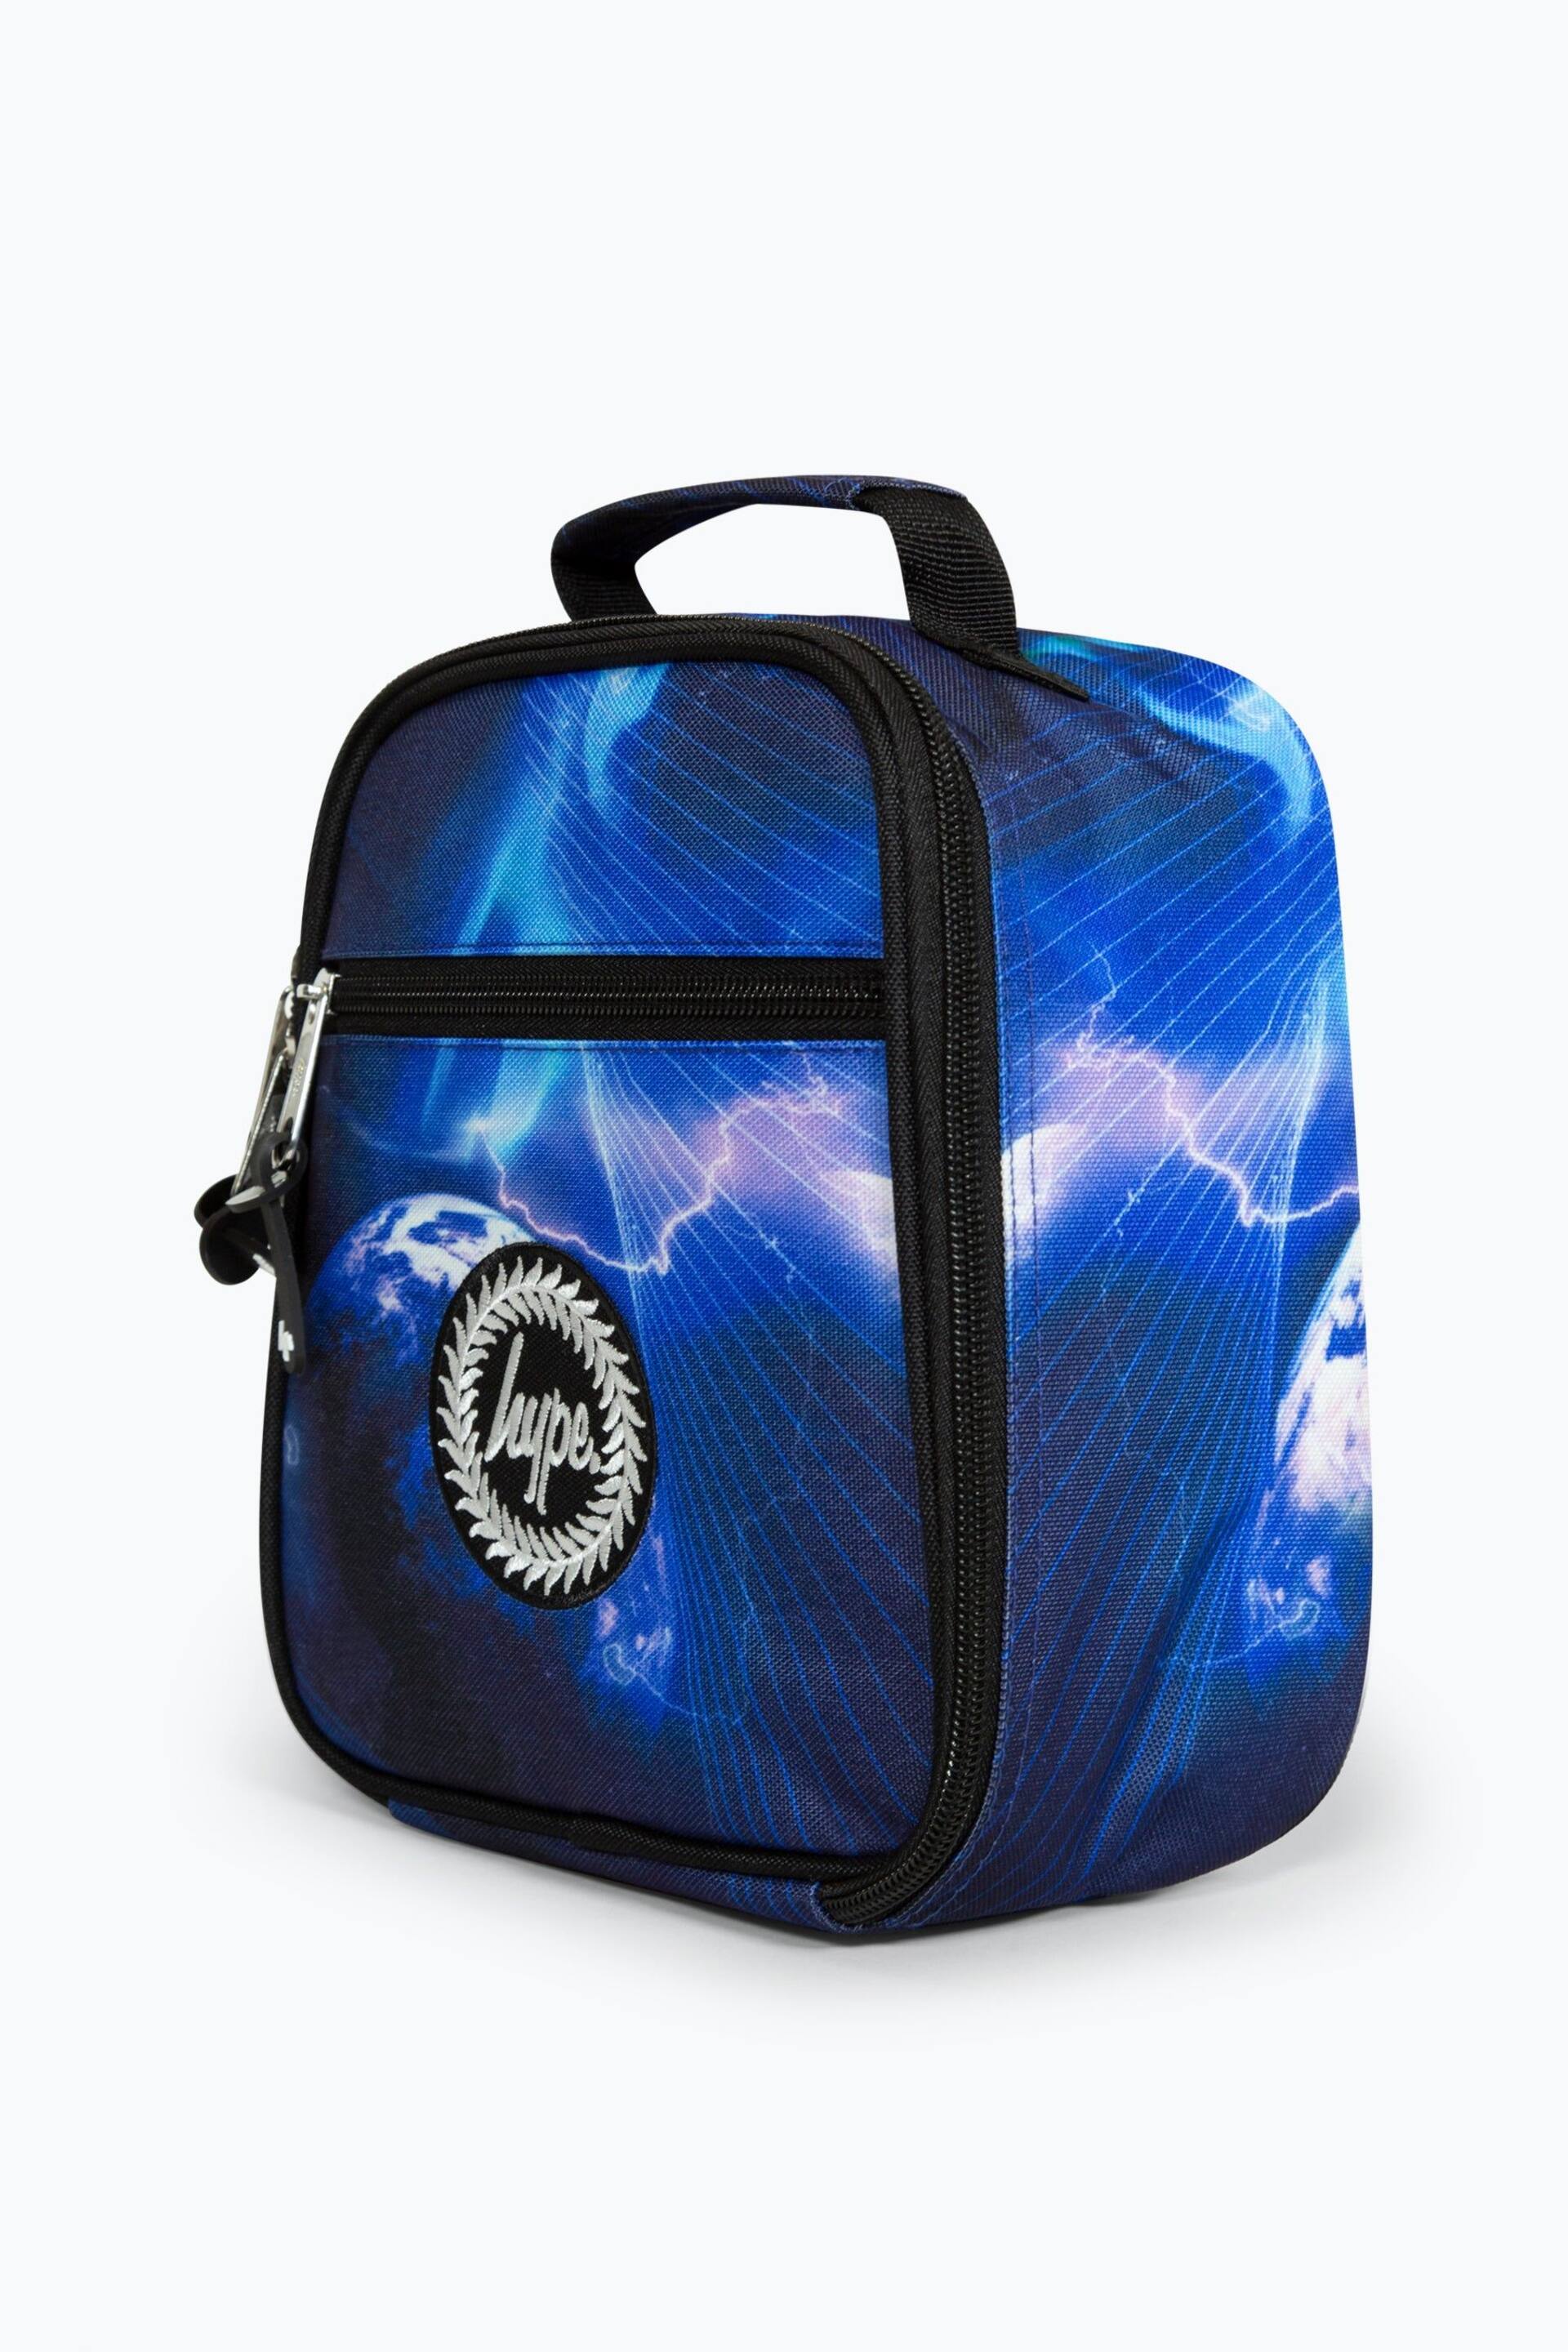 Hype. Unisex Blue Space Storm V2 Lunch Box - Image 4 of 7